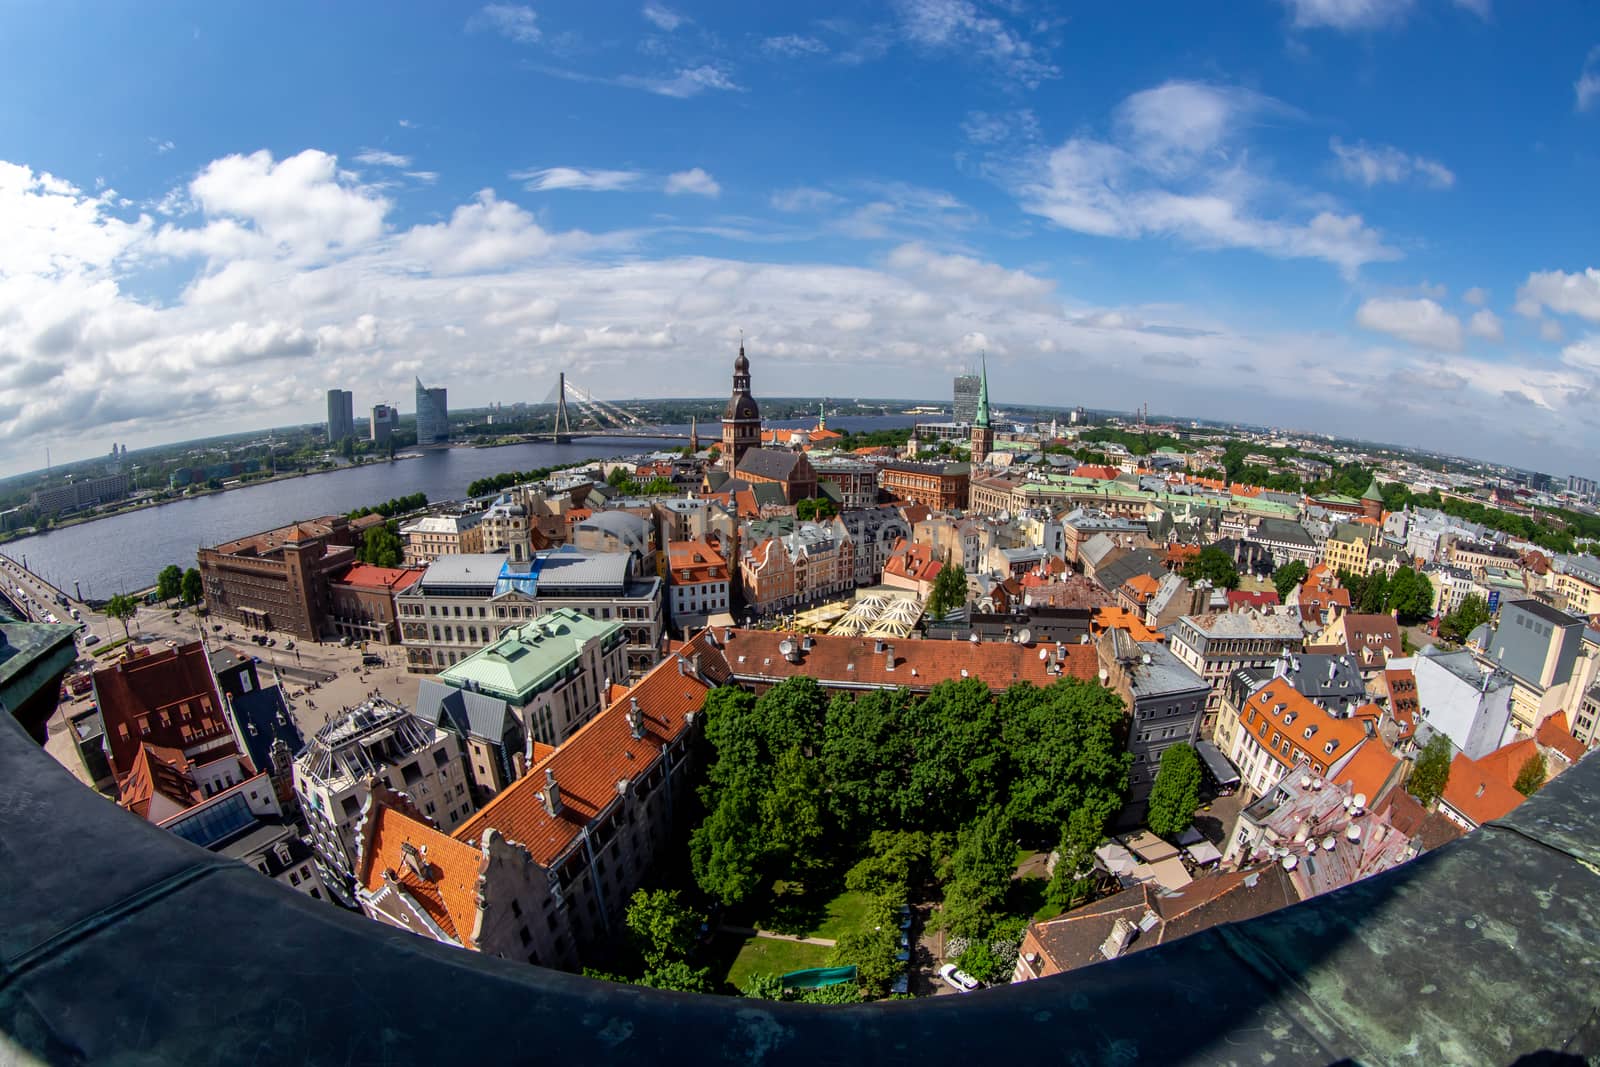 Fisheye aerial view of Riga city from st. Peter's church in Latvia. Panoramic view of Riga with cloudy blue sky. Fisheye lens.